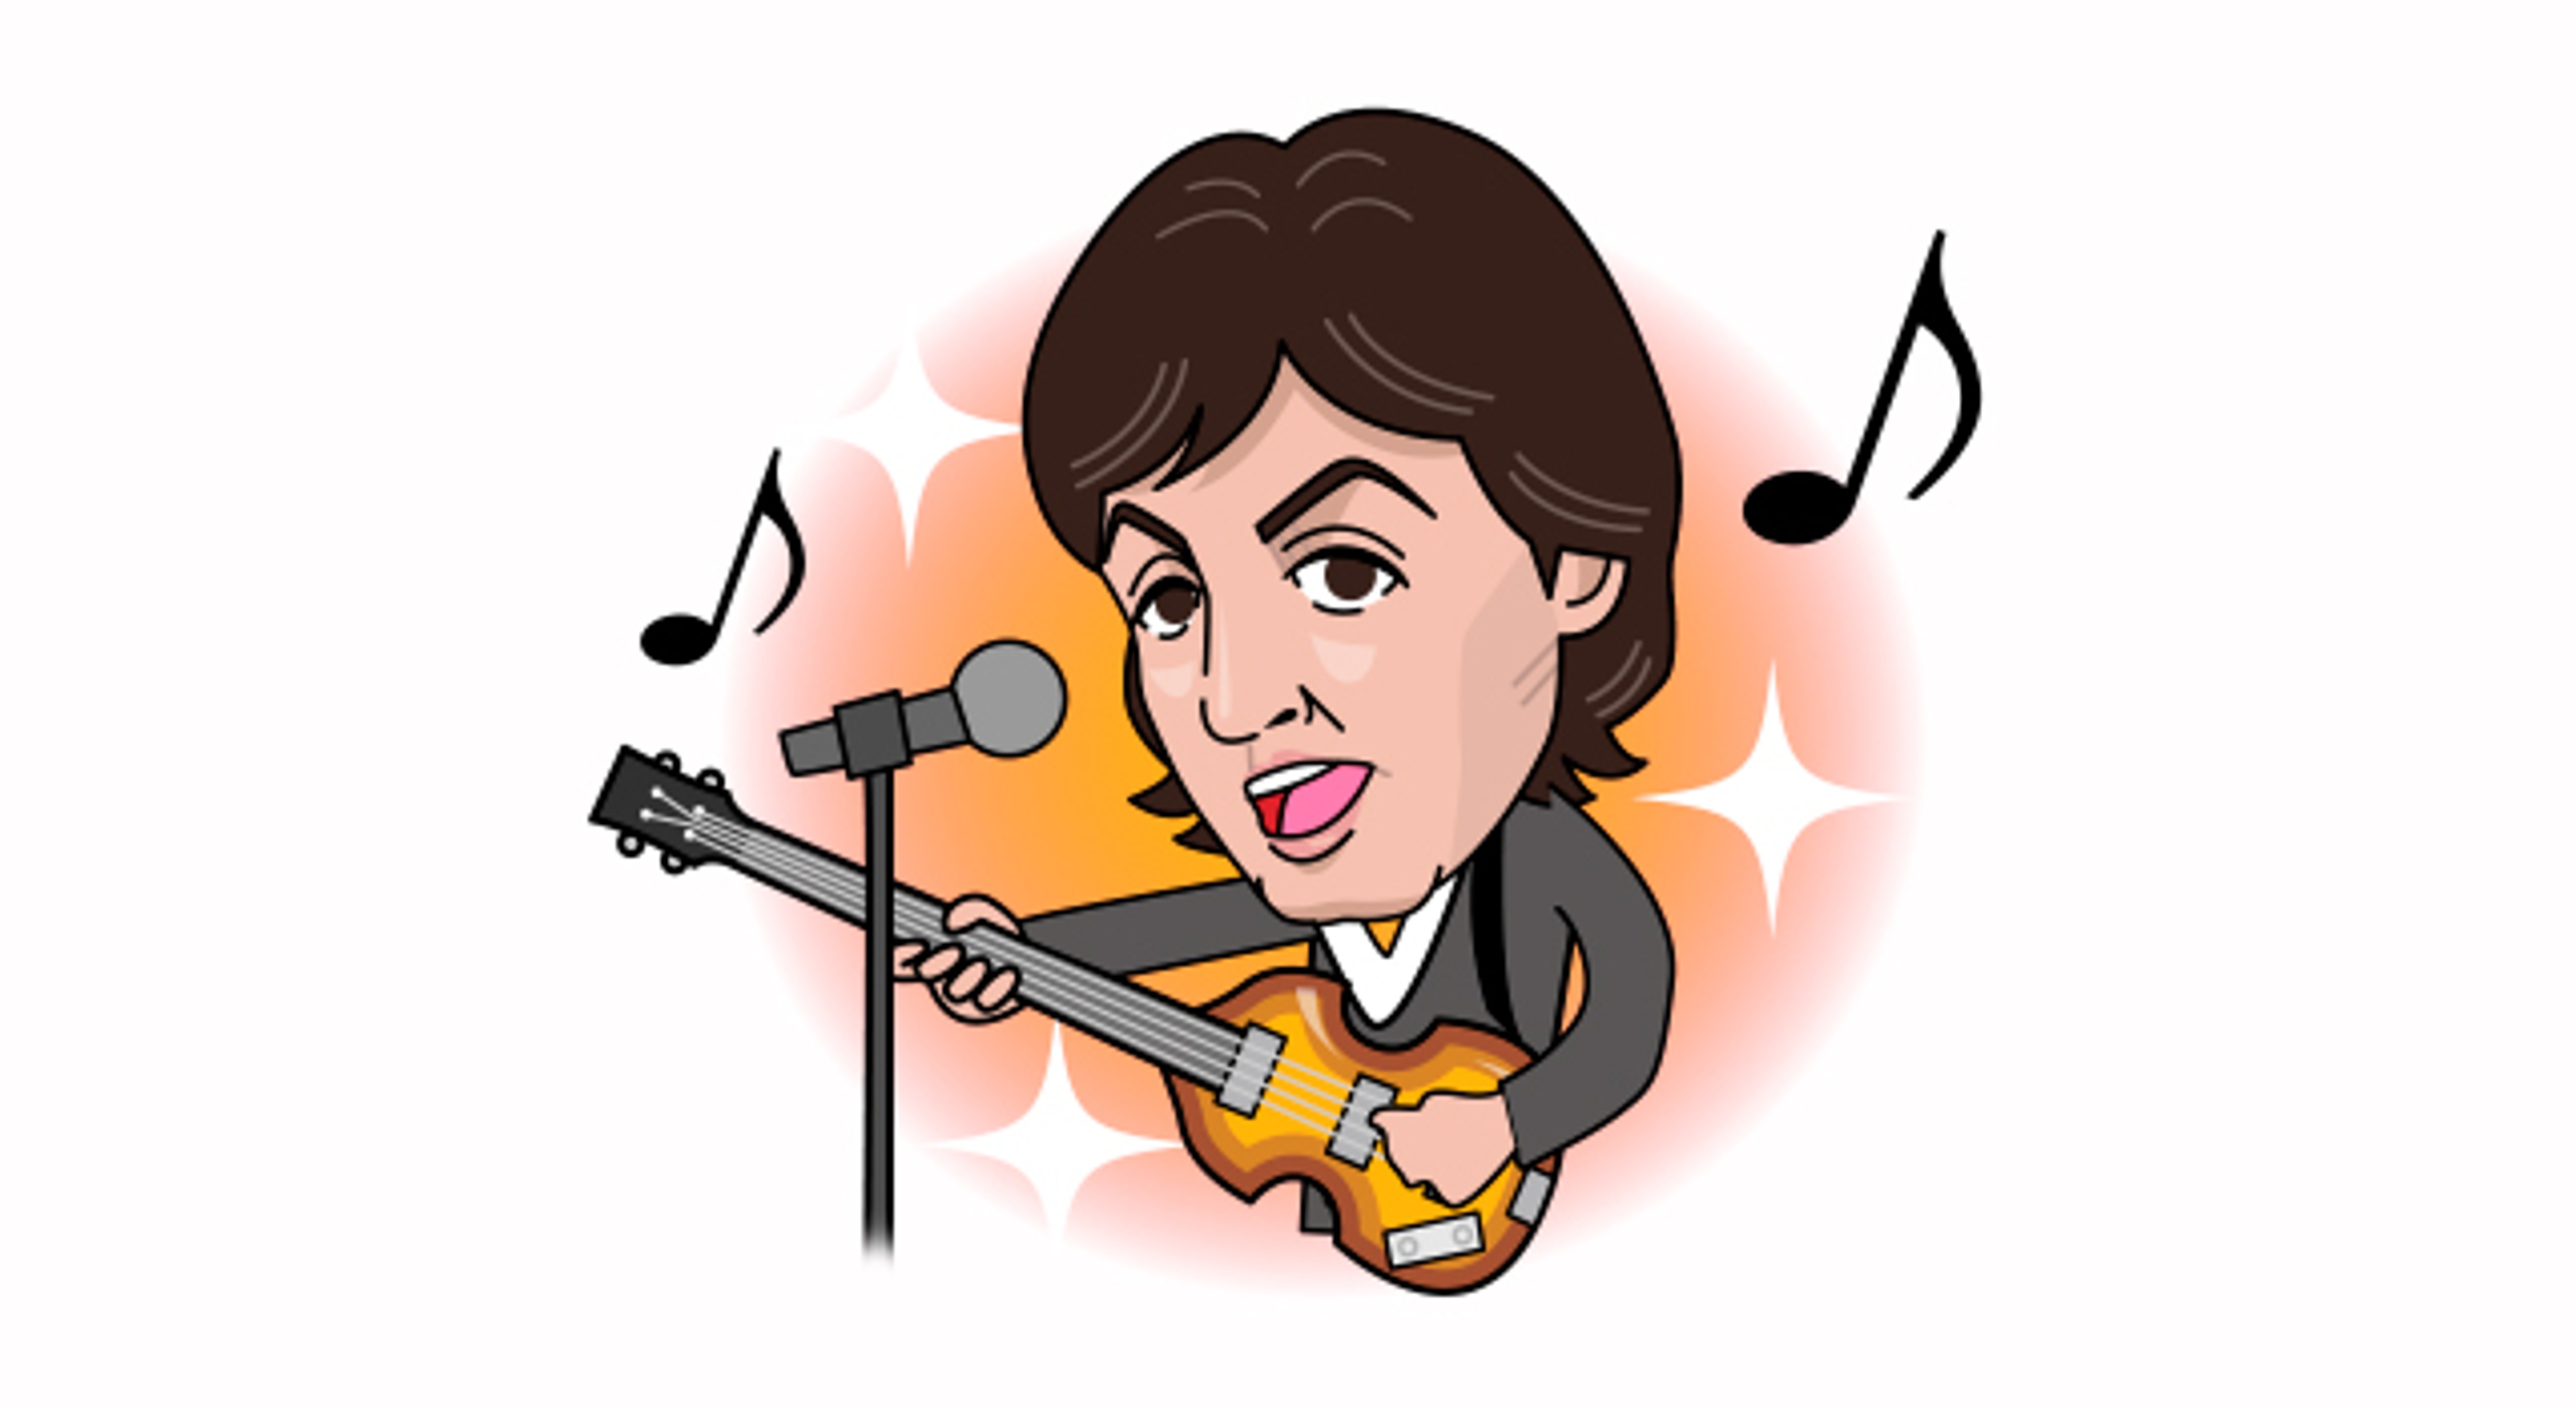 NEW Paul Stickers Available on LINE!